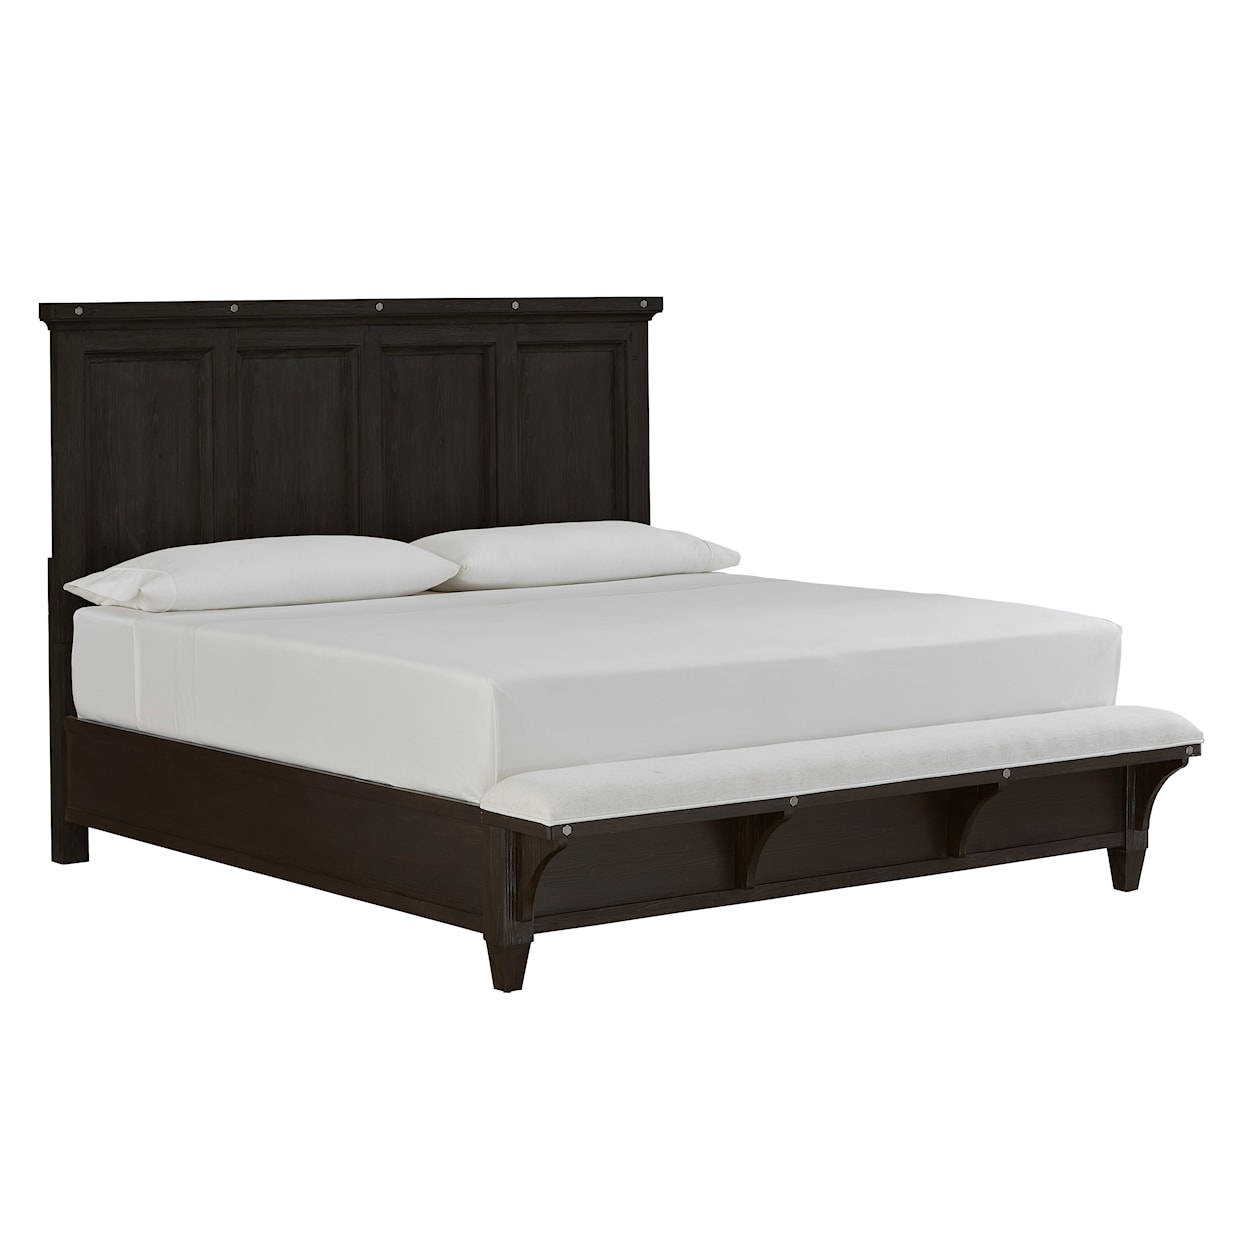 Magnussen Home Sierra Bedroom California King Panel Bed with Bench